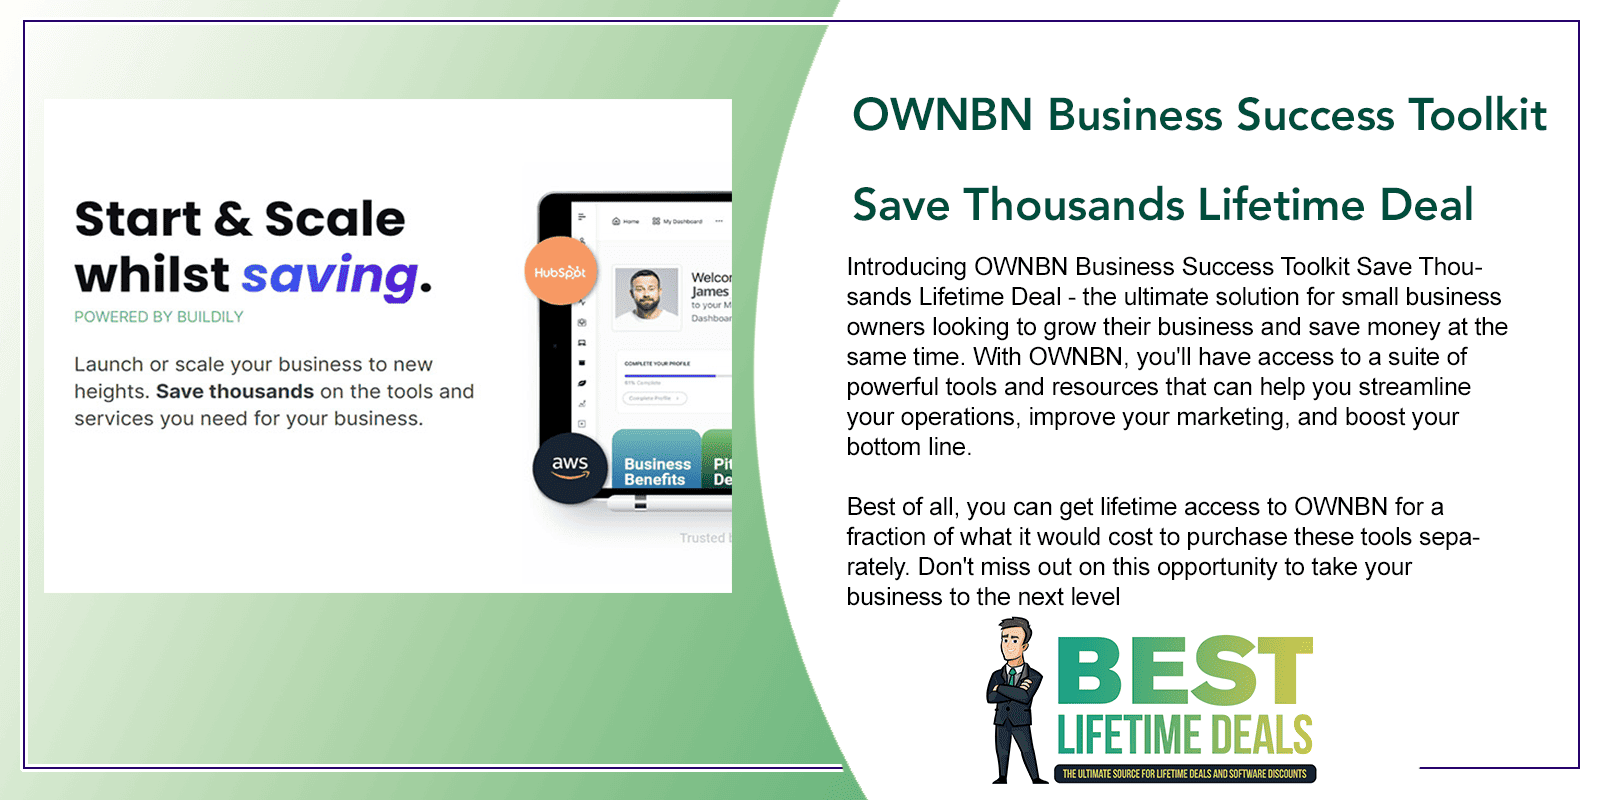 OWNBN Business Success Toolkit Save Thousands Lifetime Deal Featured Image